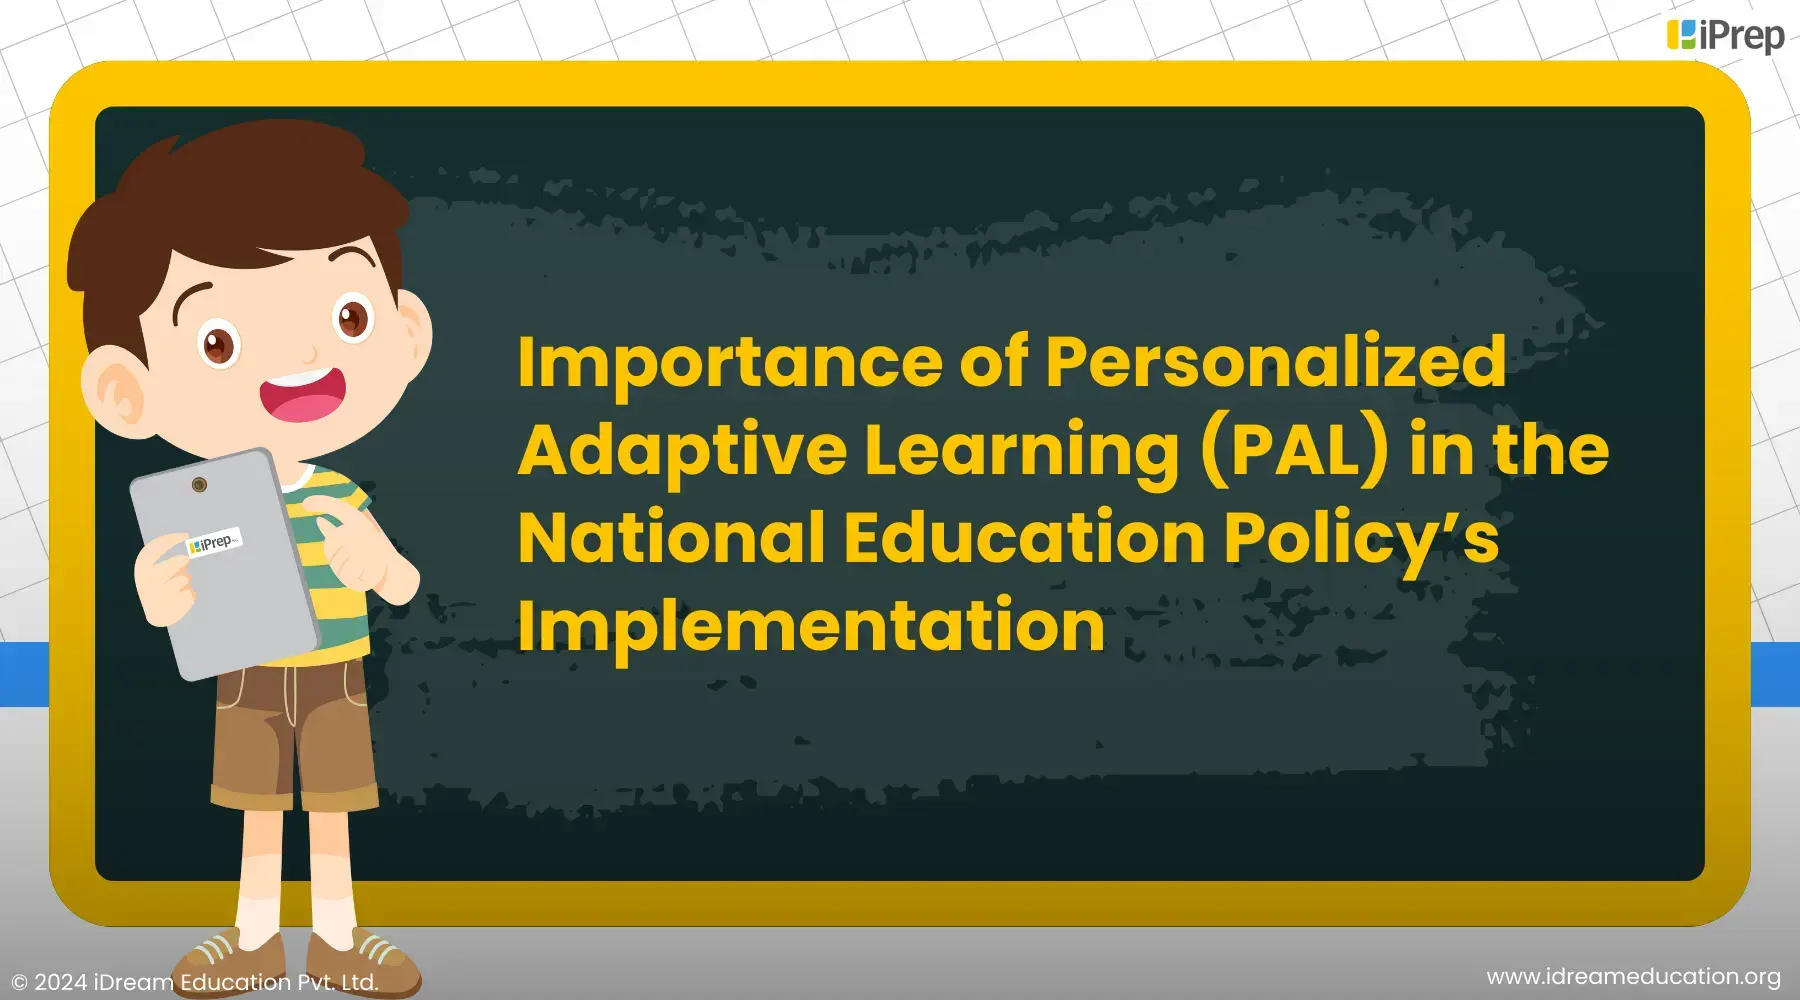 "Image showing a visual representation of the National Education Policy 2020, with emphasis on Personalized Adaptive Learning (PAL)